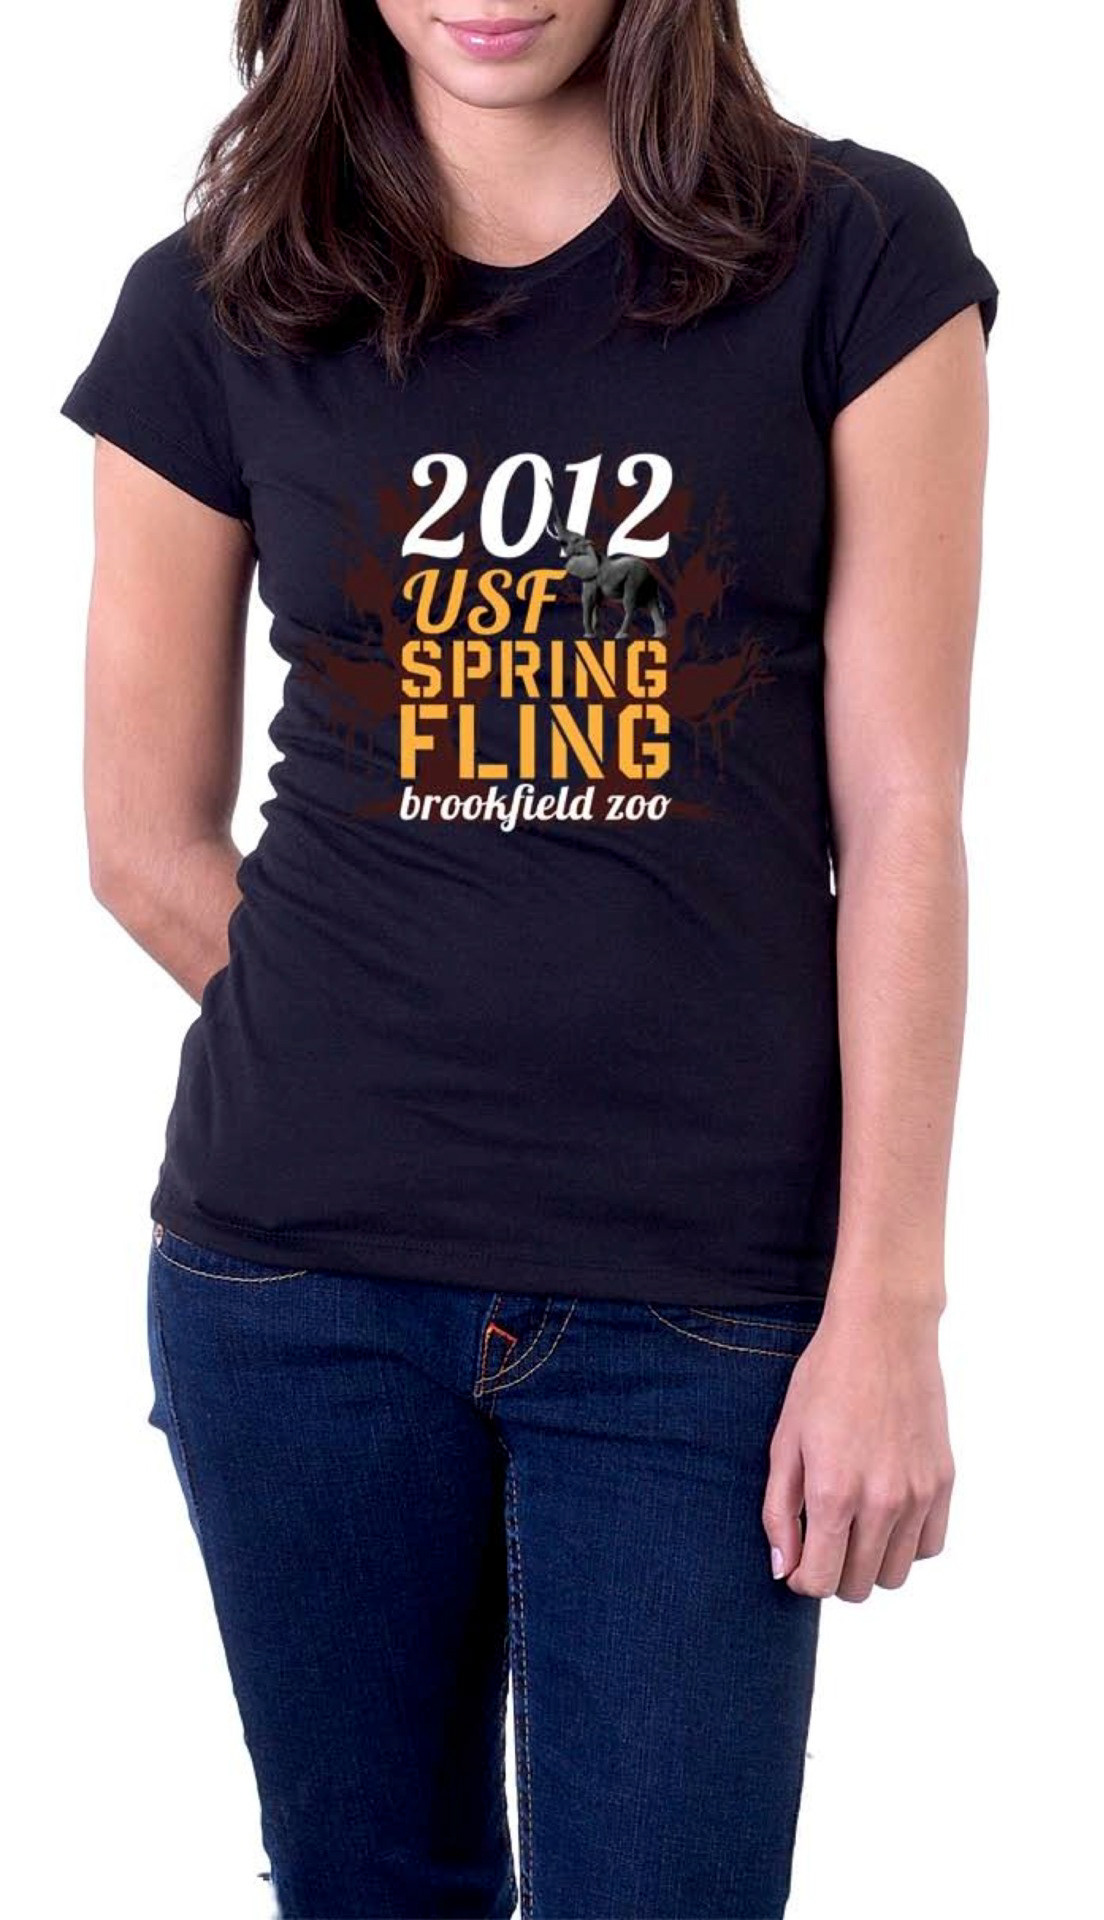 apparel Clothing shirt University college spring fling Student Activities